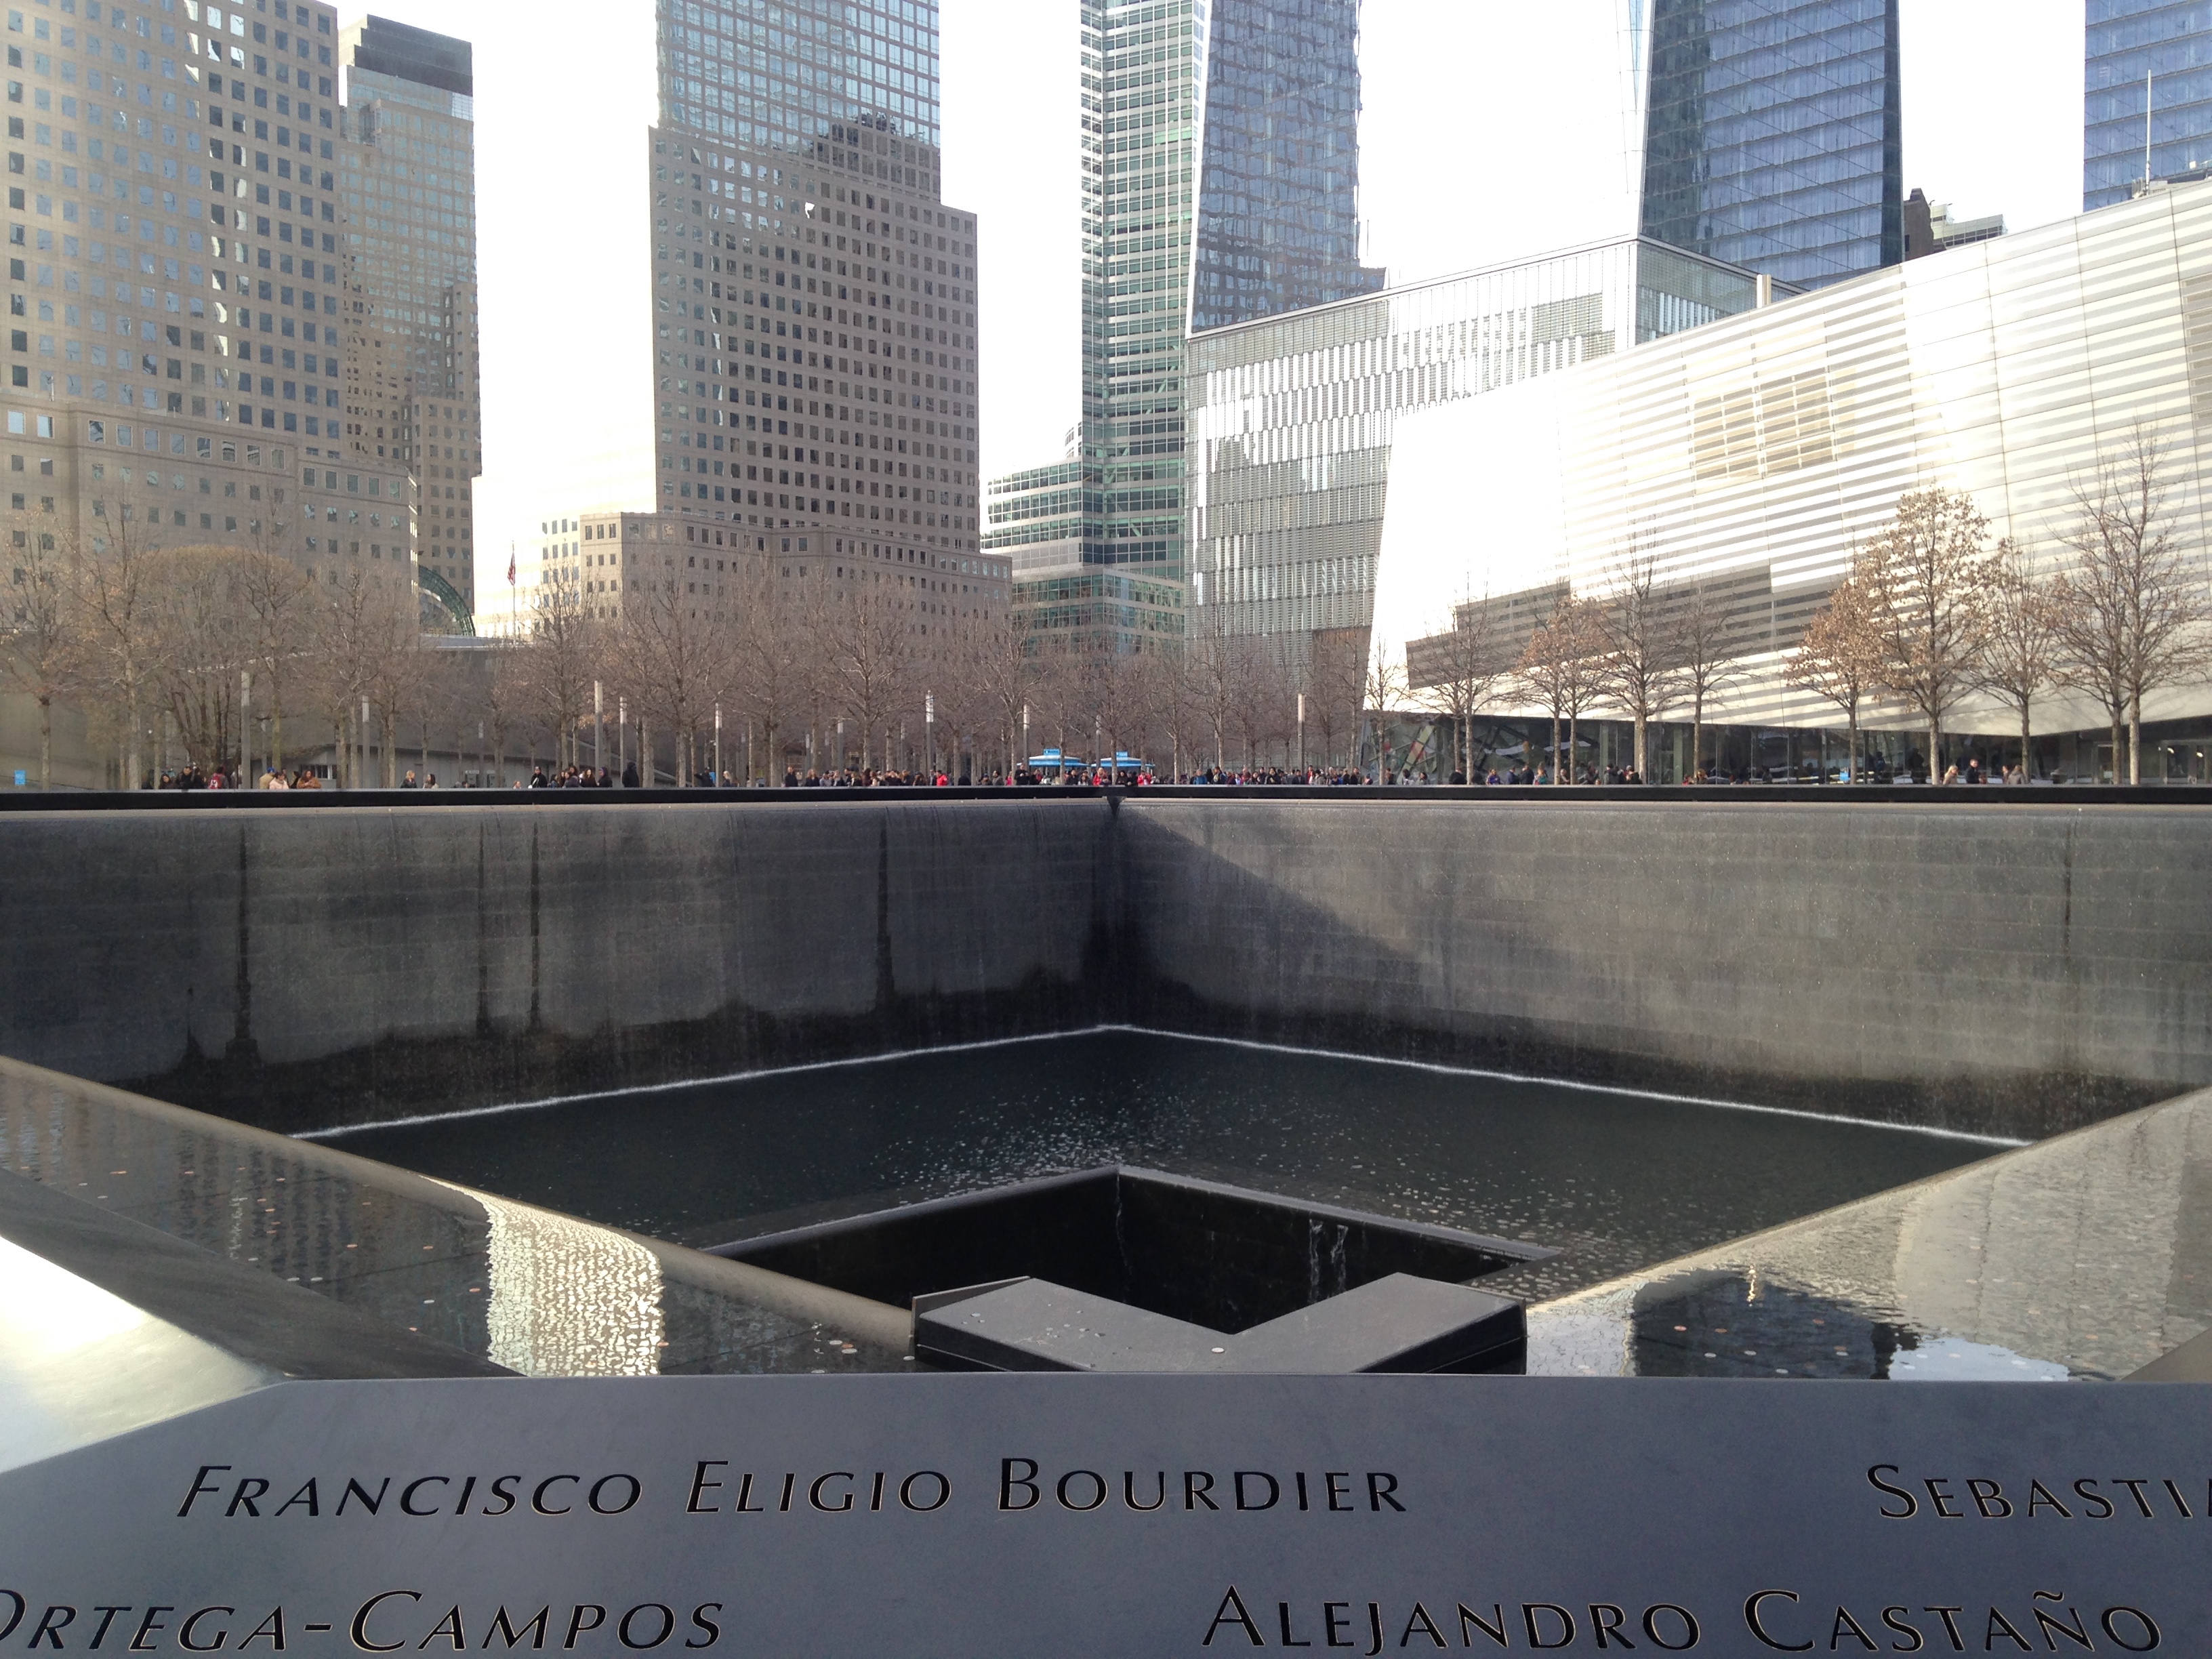 Beautiful in the most tragic way possible - NYC's 9/11 Memorial.